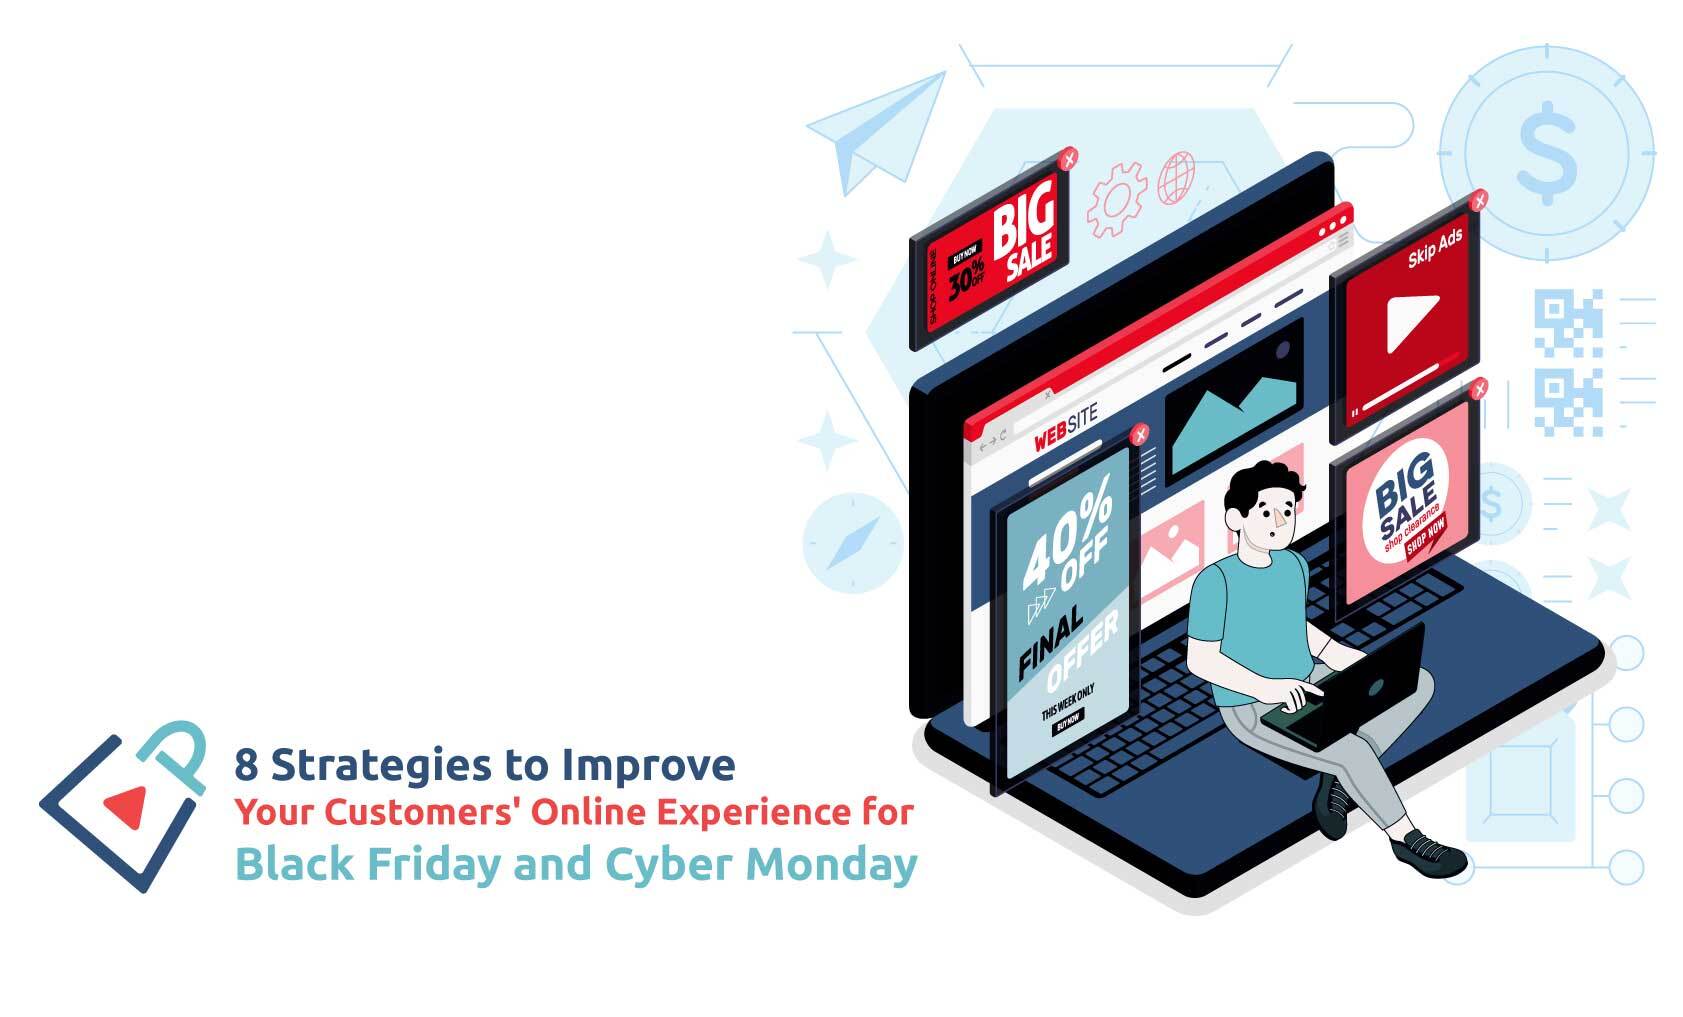 8 Strategies to Improve Your Customers' Online Experience for Black Friday and Cyber Monday